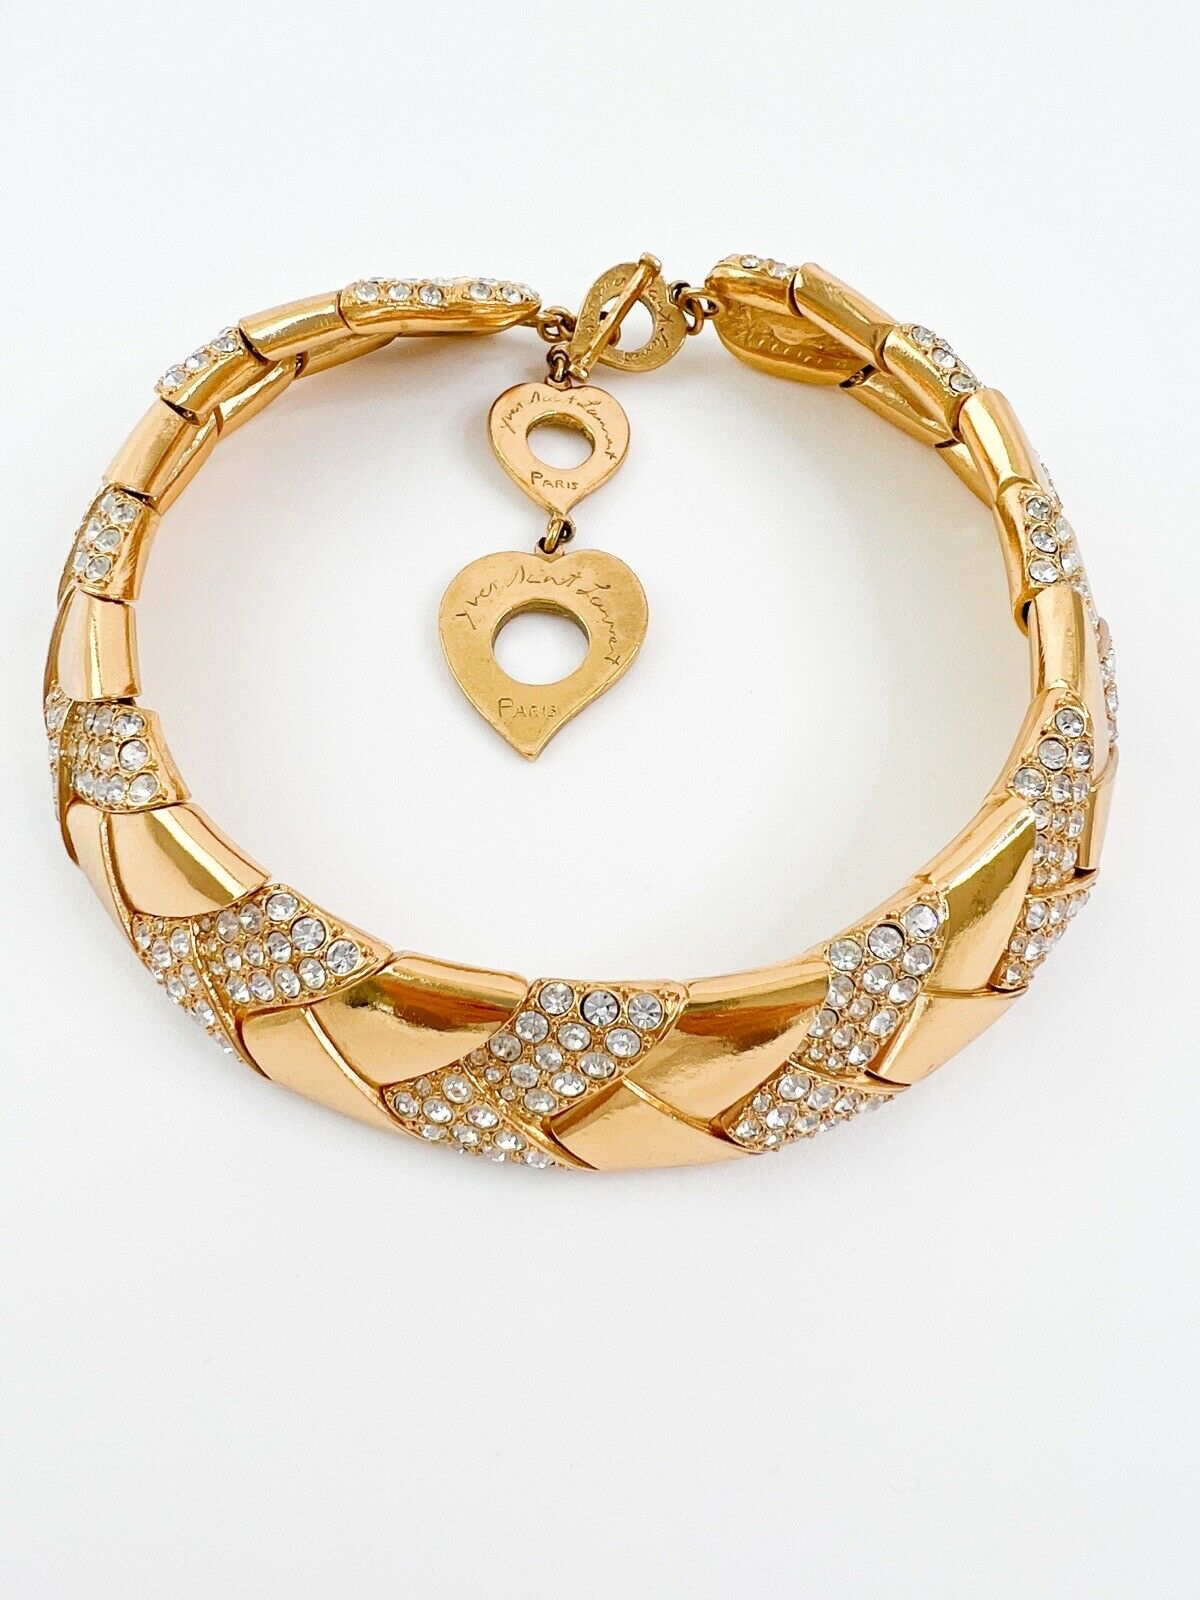 YSL Yves Saint Laurent rive gauche Made in France Vintage Necklace Choker Gold Rhinestones